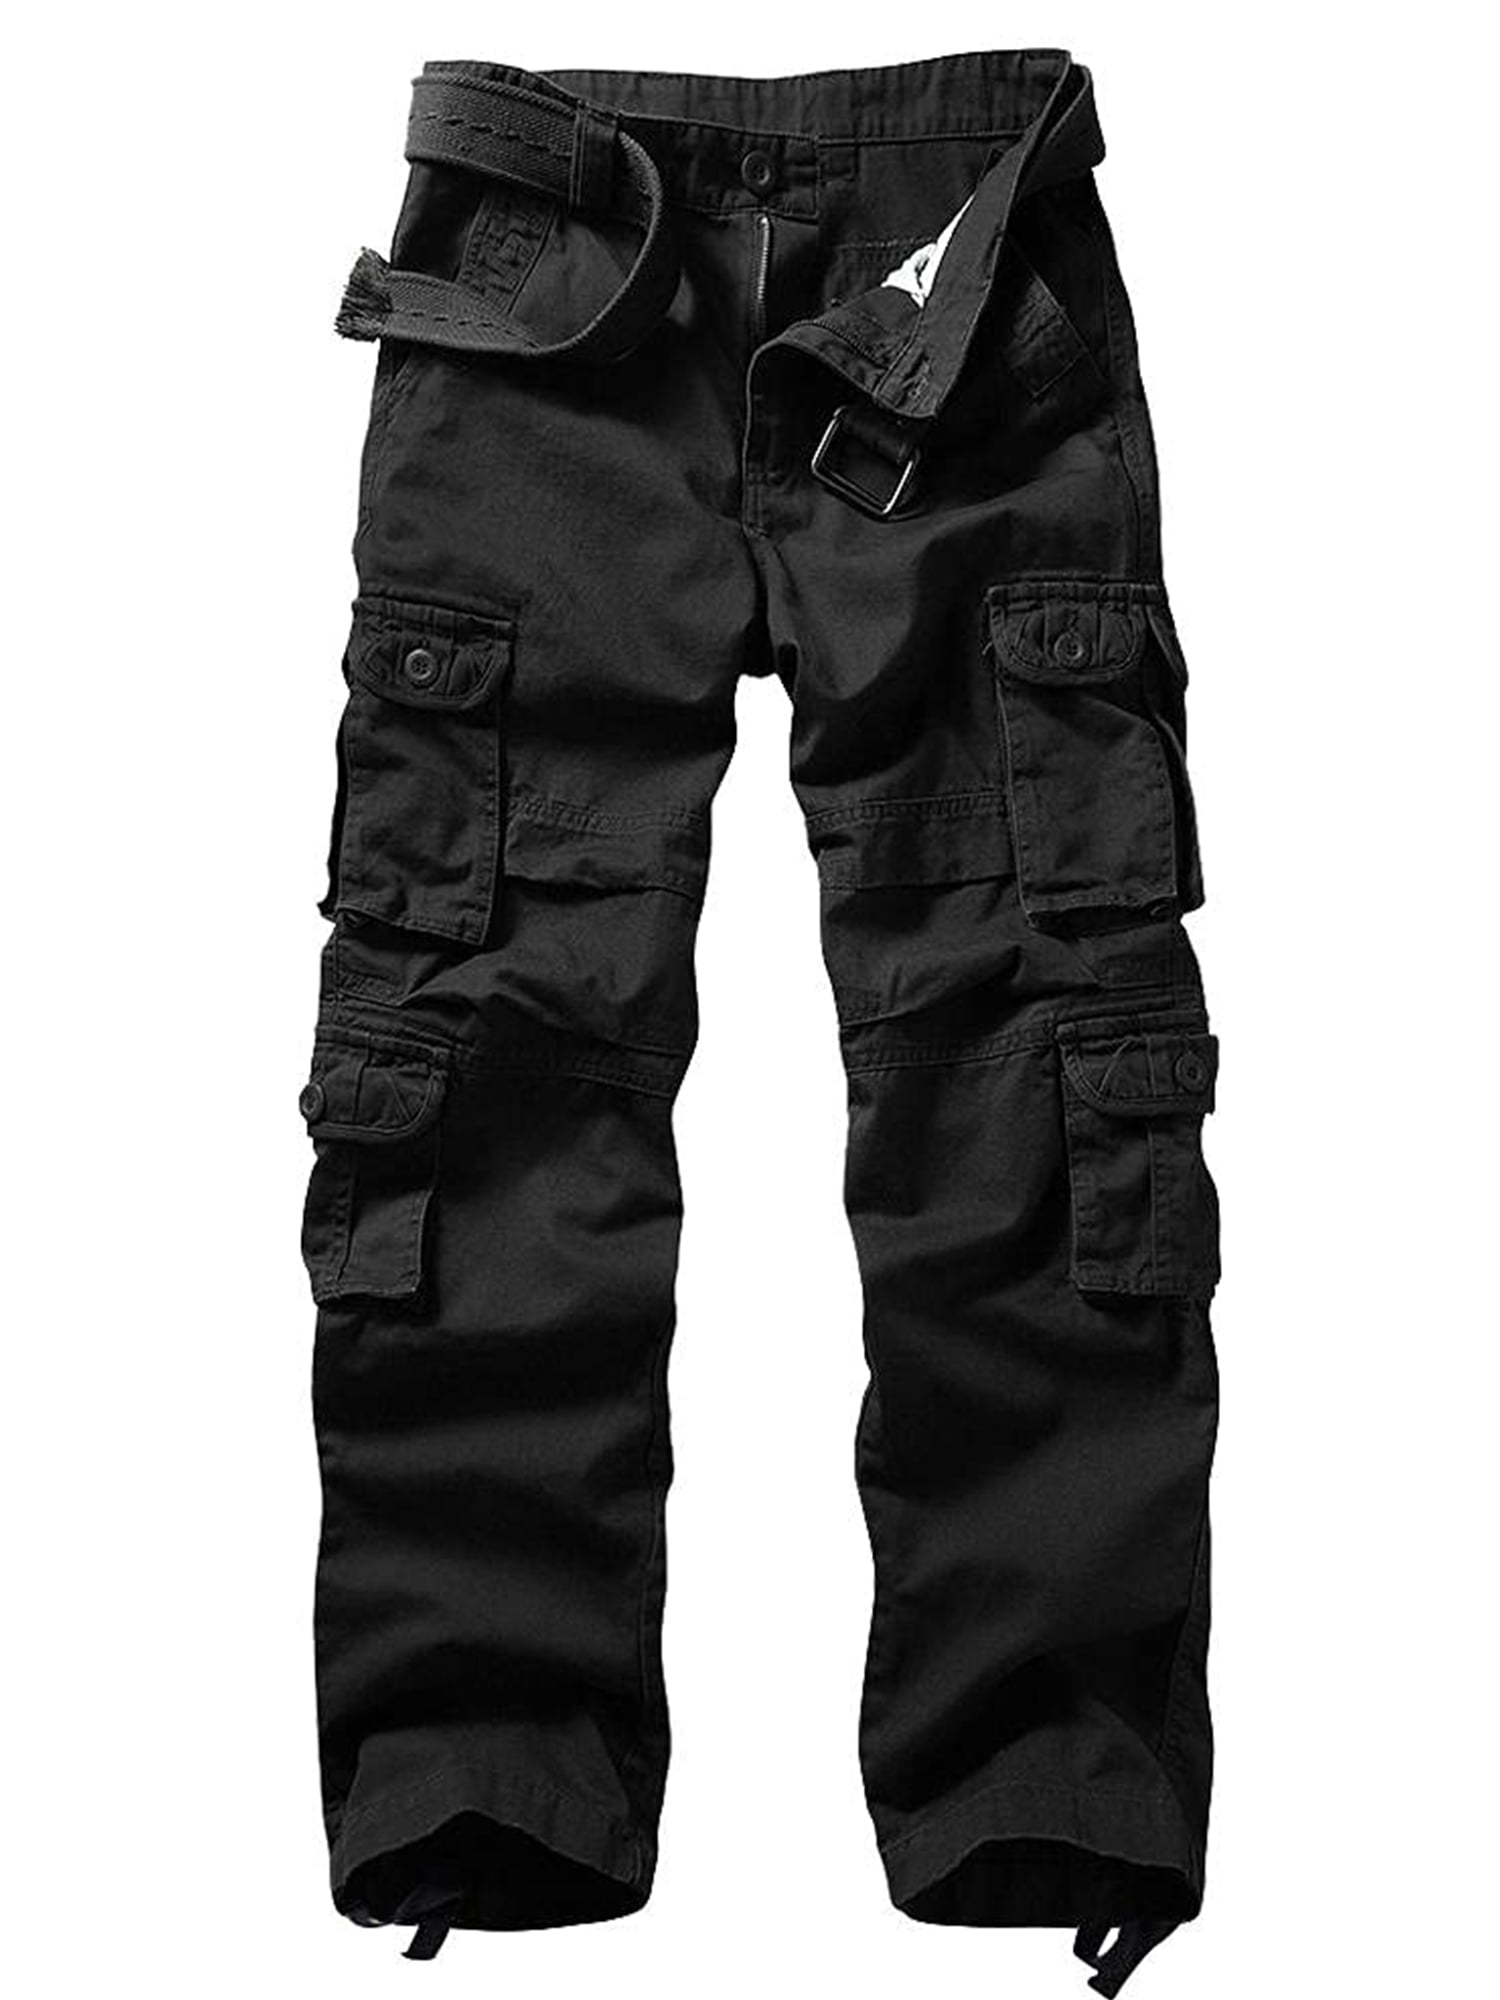 Men's Relaxed Fit Cargo Pants with Multi Pockets Outdoor Work Pants 34 ...